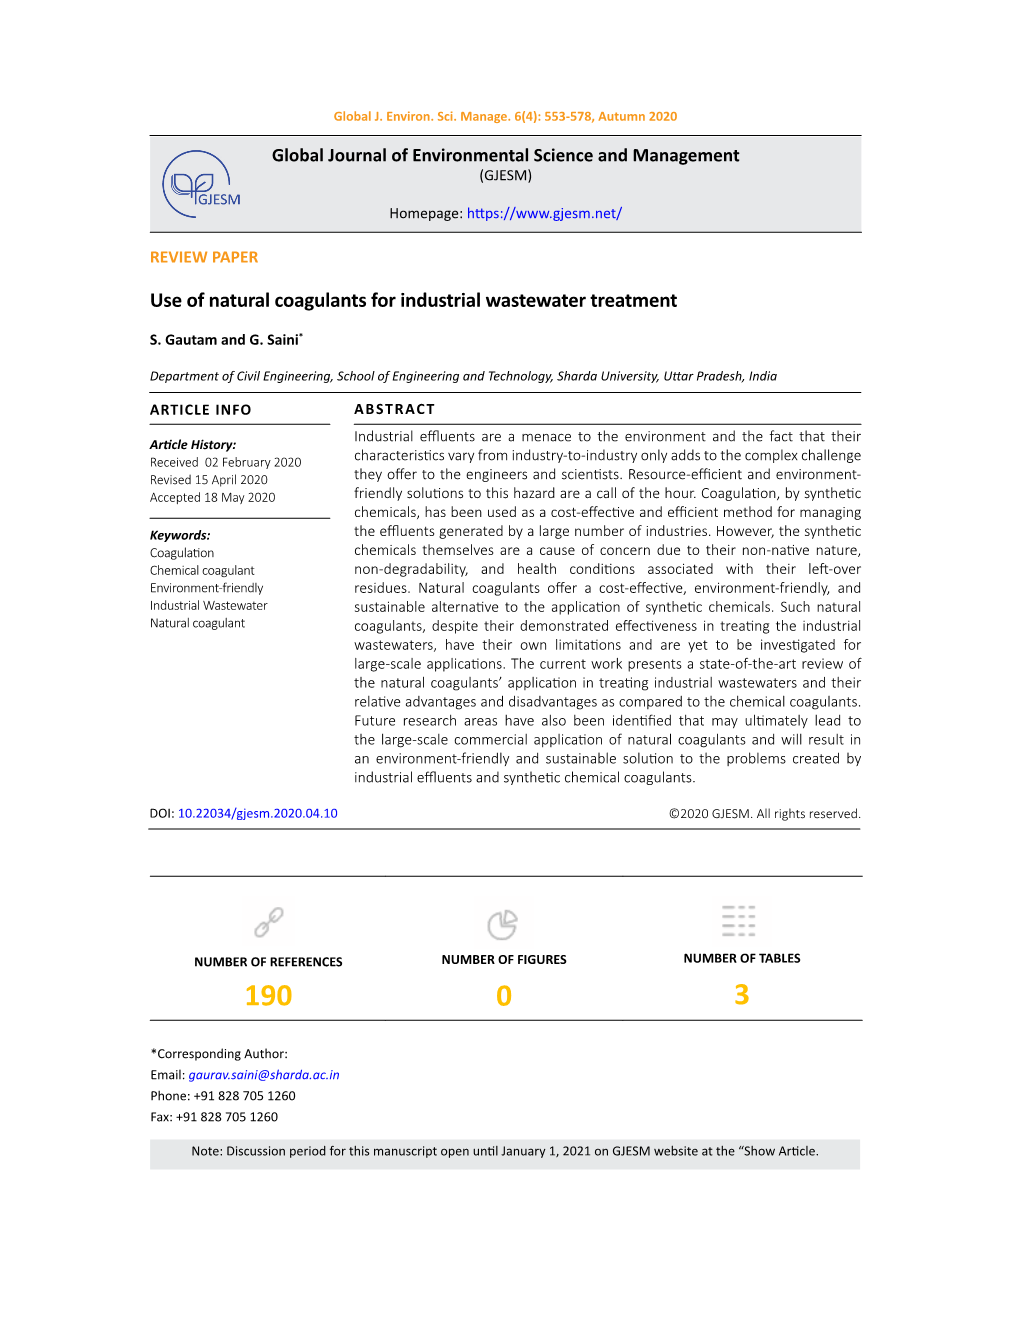 Use of Natural Coagulants for Industrial Wastewater Treatment